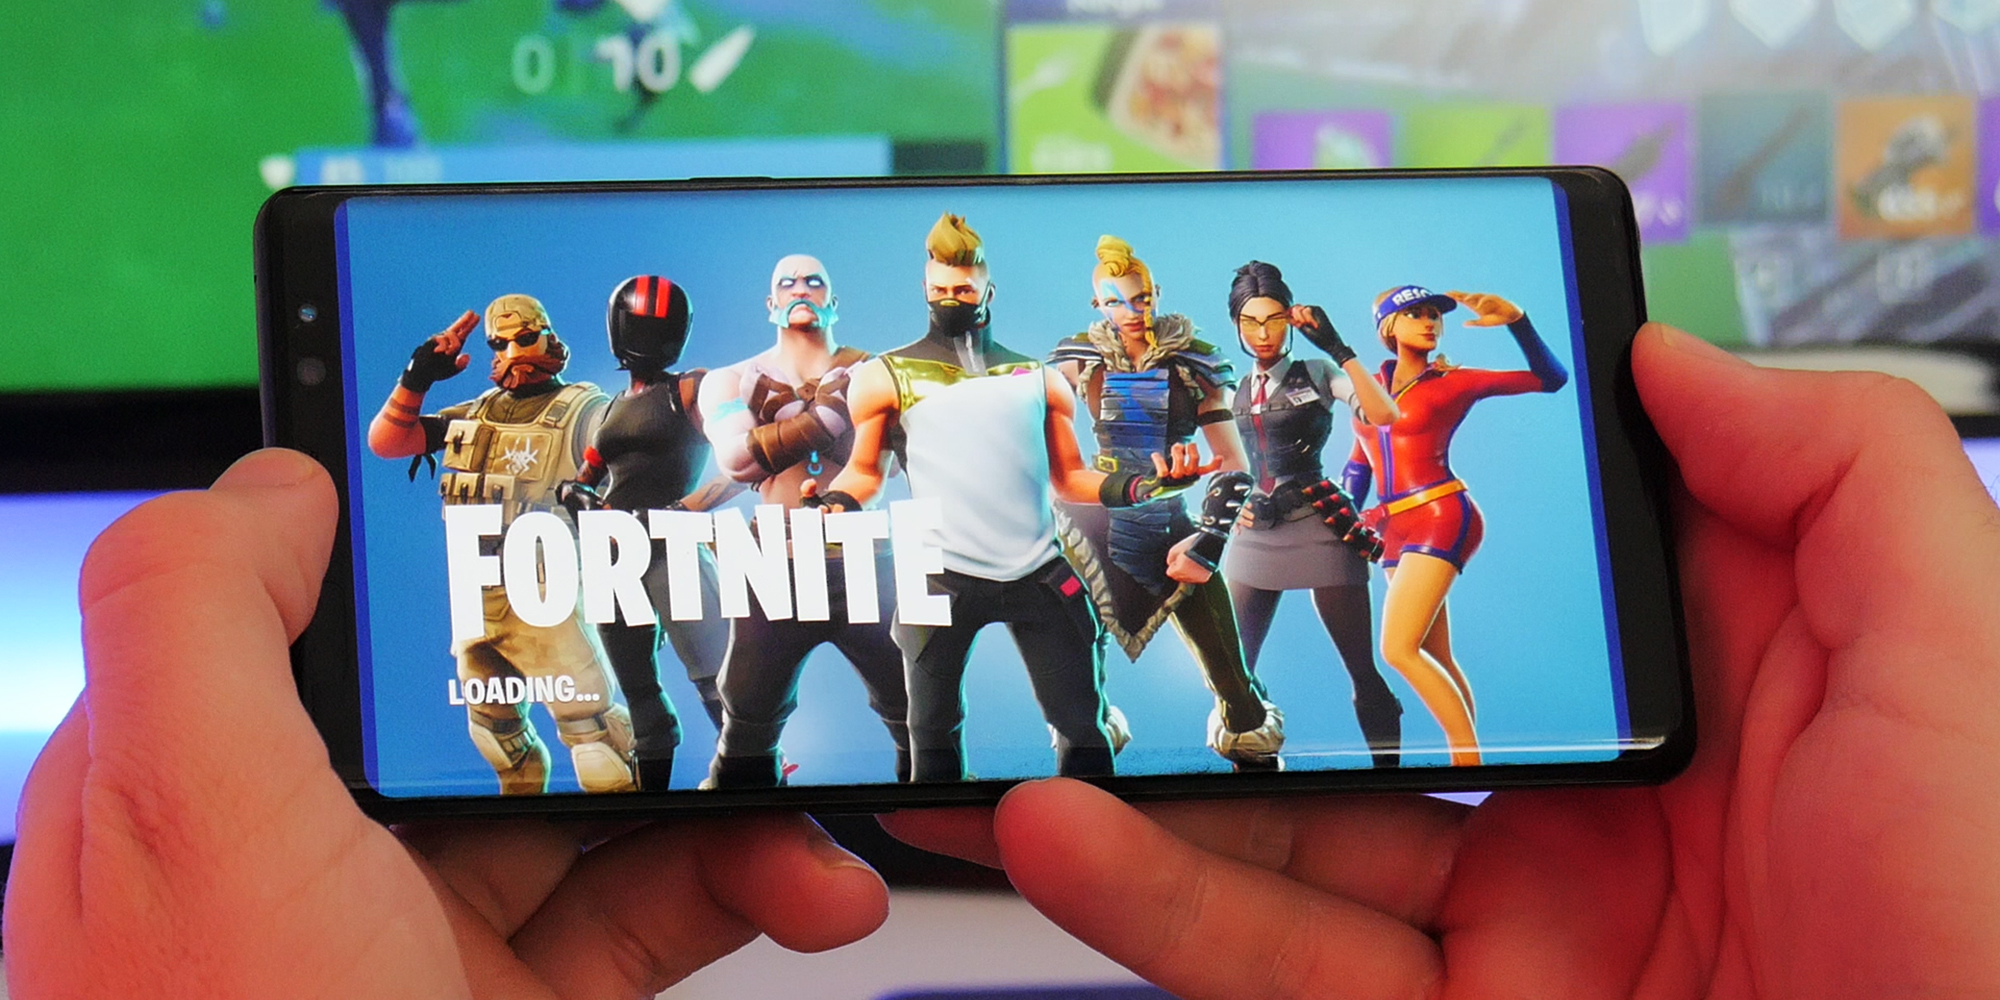 When is the official release date for fortnite on android Exclusive Epic Submitting Fortnite For Android To Play Store In Hopes Of Special Billing Exception 9to5google